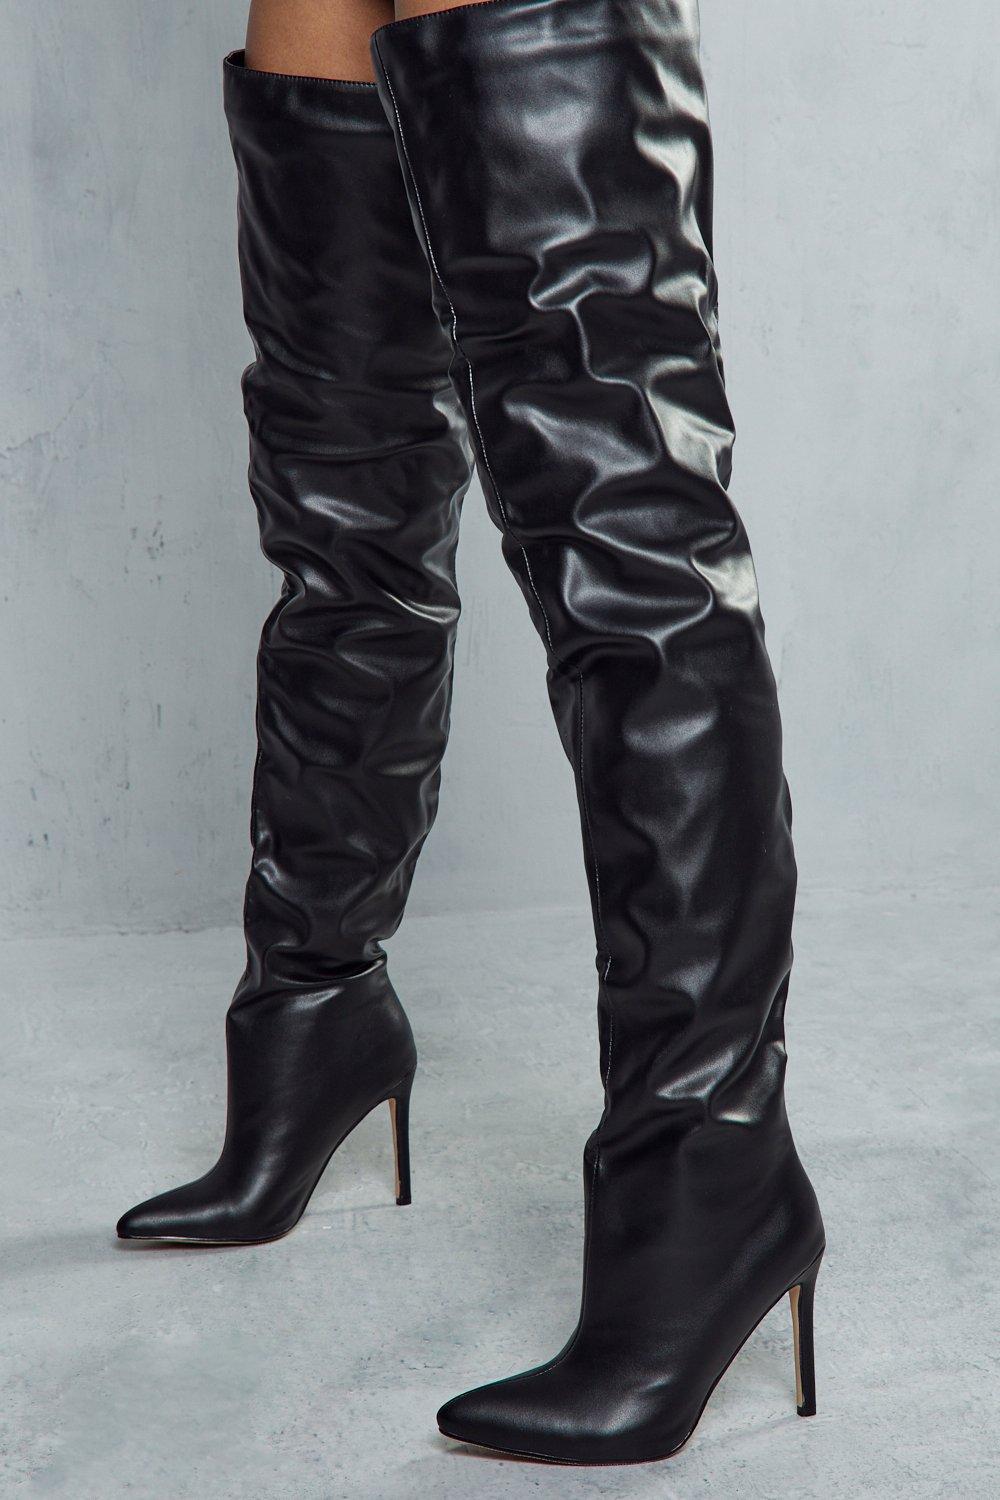 thigh high black pointed boots